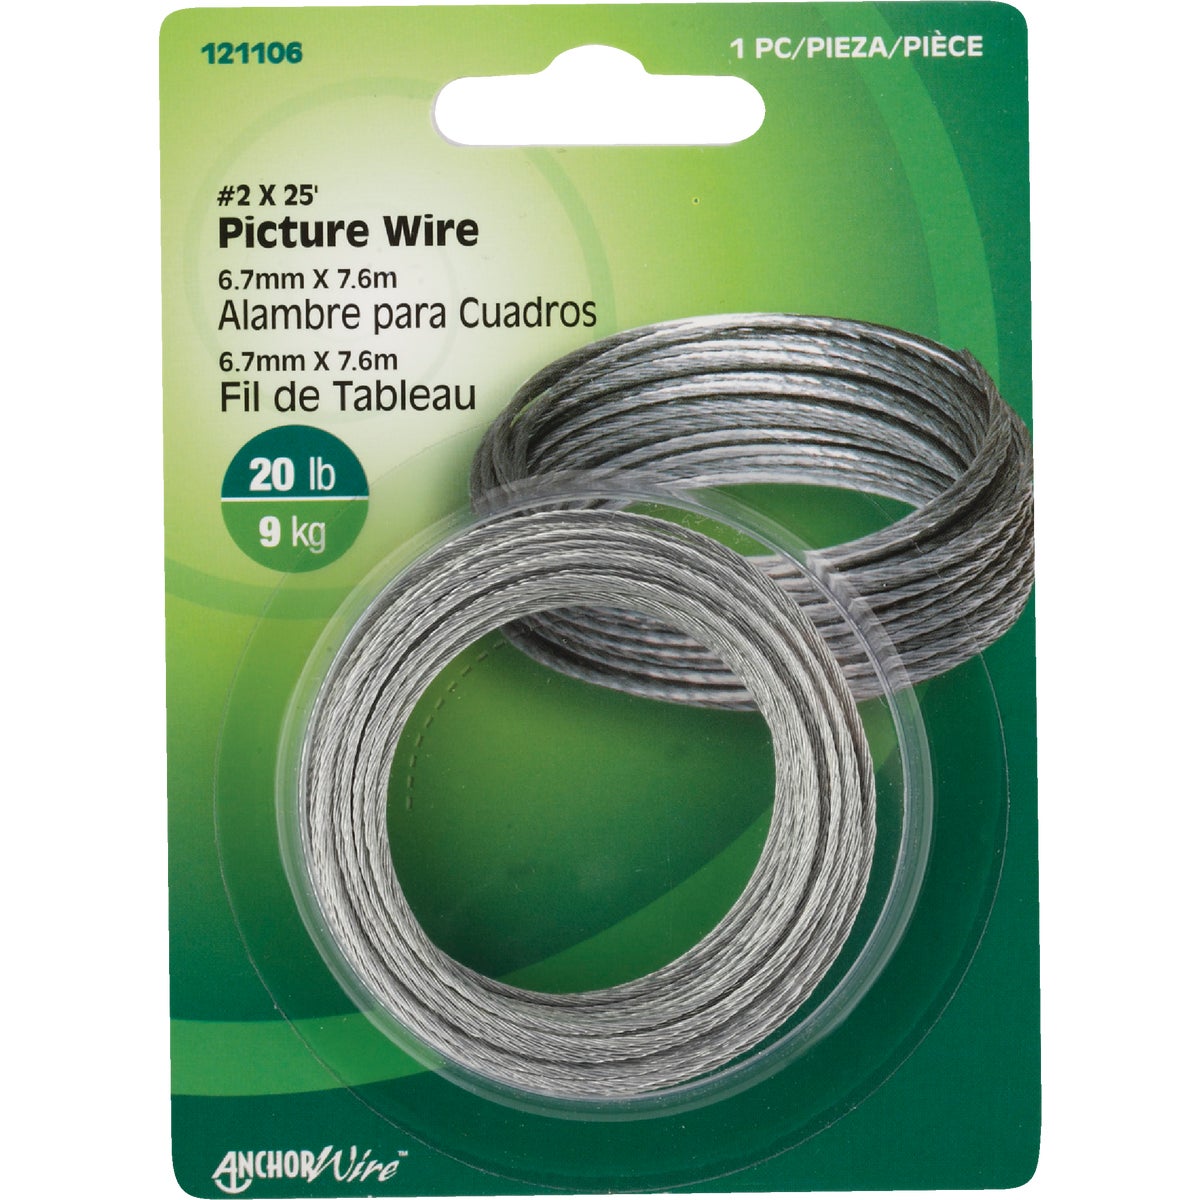 Item 220558, Hillman Picture Hanging Wire Galvanized is great for finishing up any at 